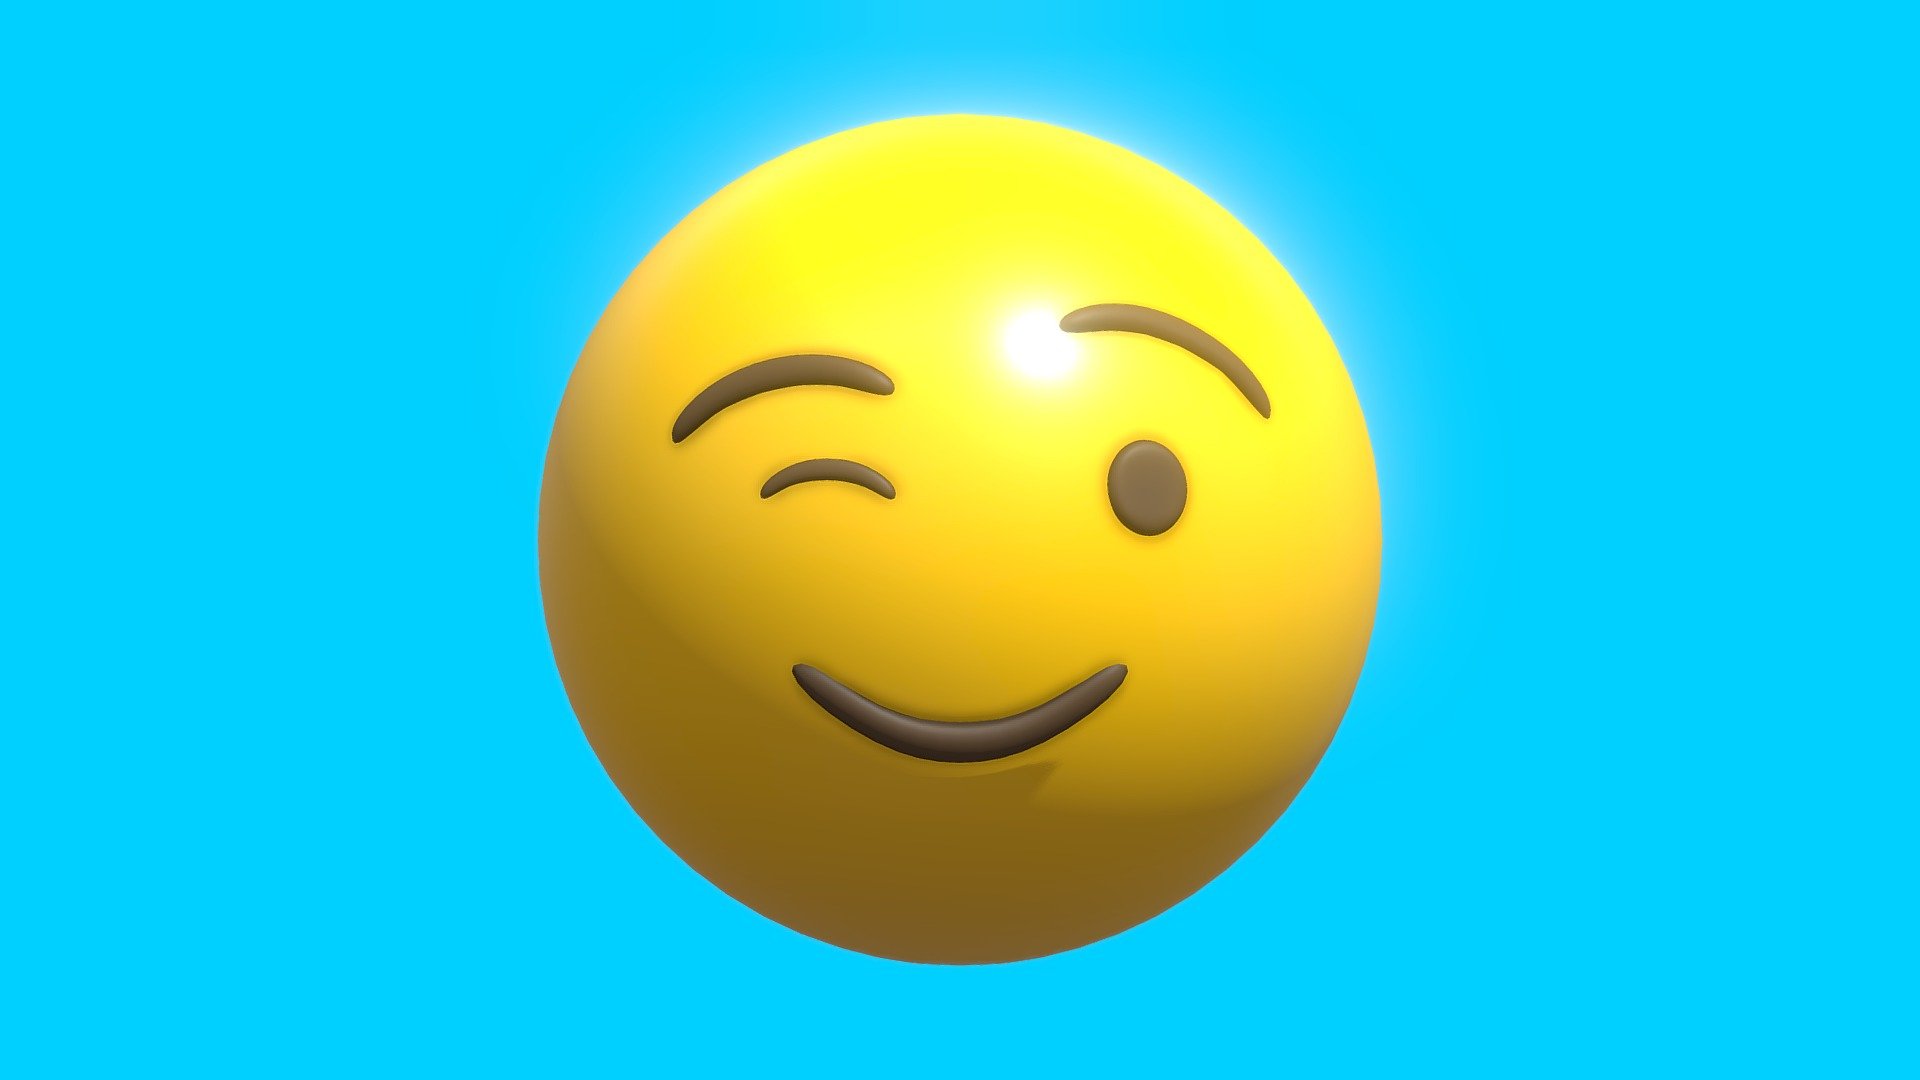 Wink Face Emoticon Emoji or Smiley 3D Model Made in Blender 4.0

This model does include a TEXTURE, DIFFUSE, and ROUGHNESS MAP, but if you want to change the color you can change it in the blend file, just use the principled bsdf and play with the rough and base color parameter

in the blender file i just included the Model with the Subdivide Modifier and Base Material but Different UV Map - Wink Face Emoticon Emoji or Smiley - Buy Royalty Free 3D model by pakyucangkun 3d model